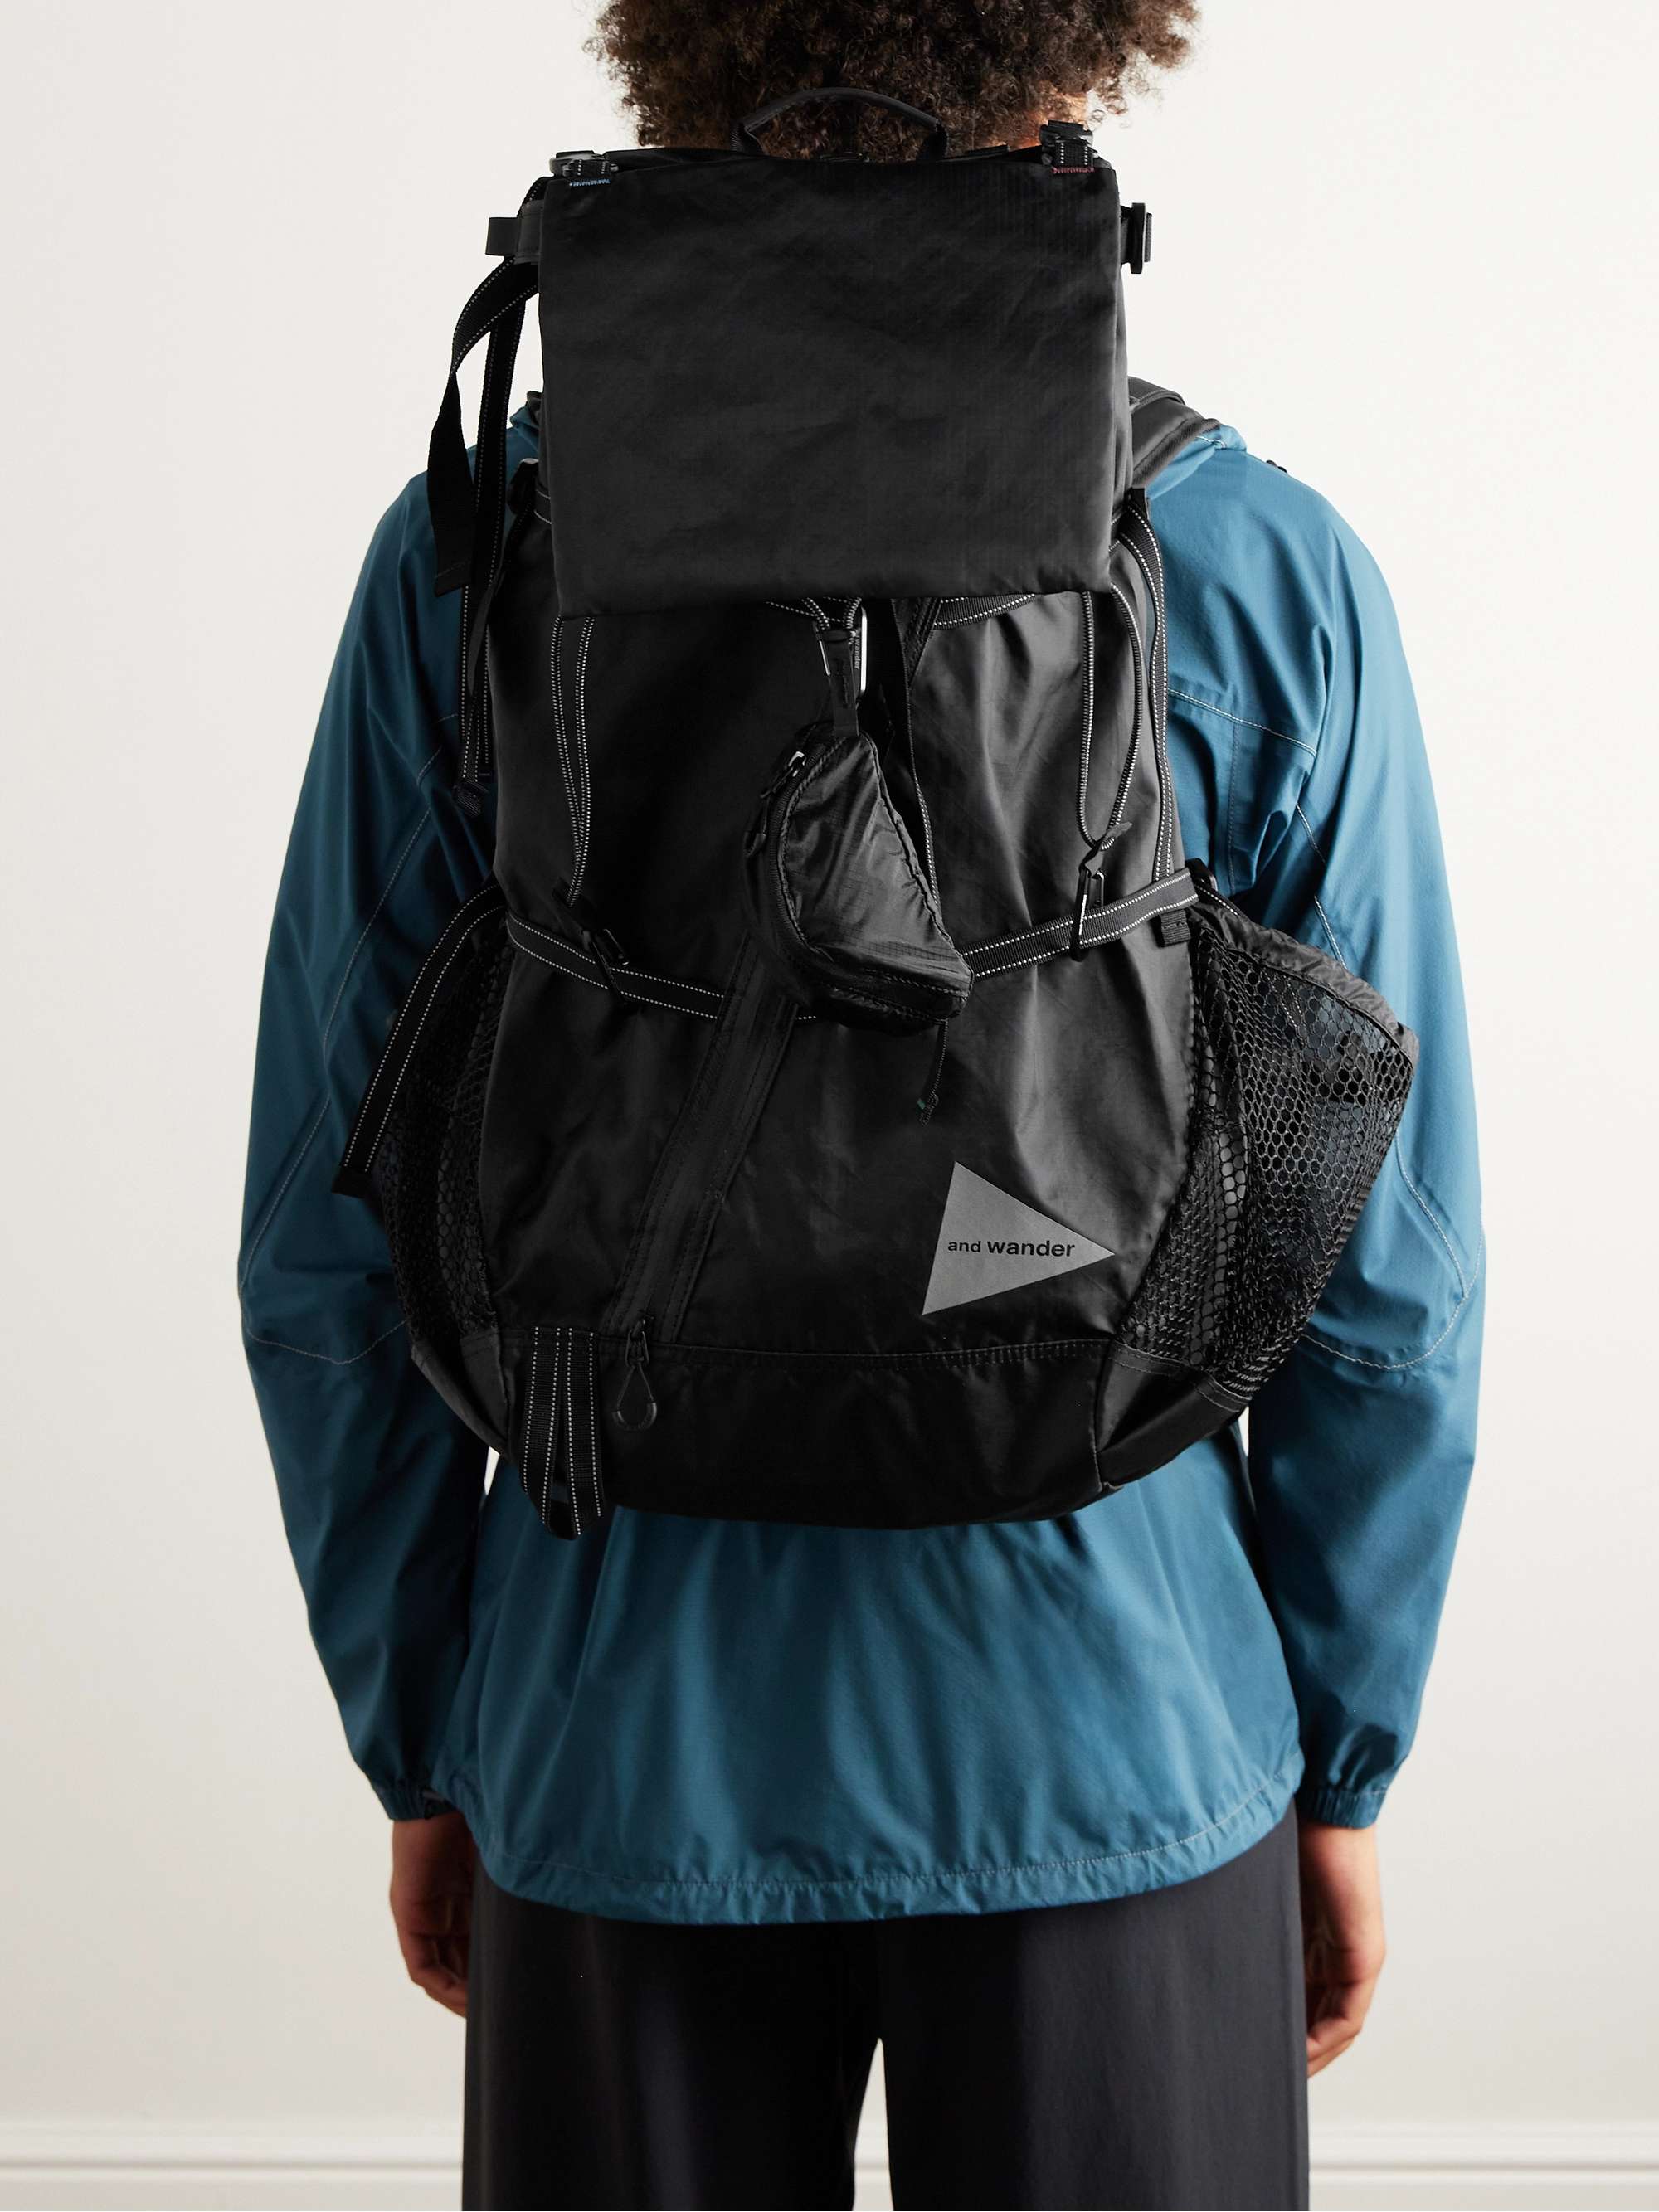 AND WANDER Ecopack Logo-Print Recycled Ripstop Backpack for Men